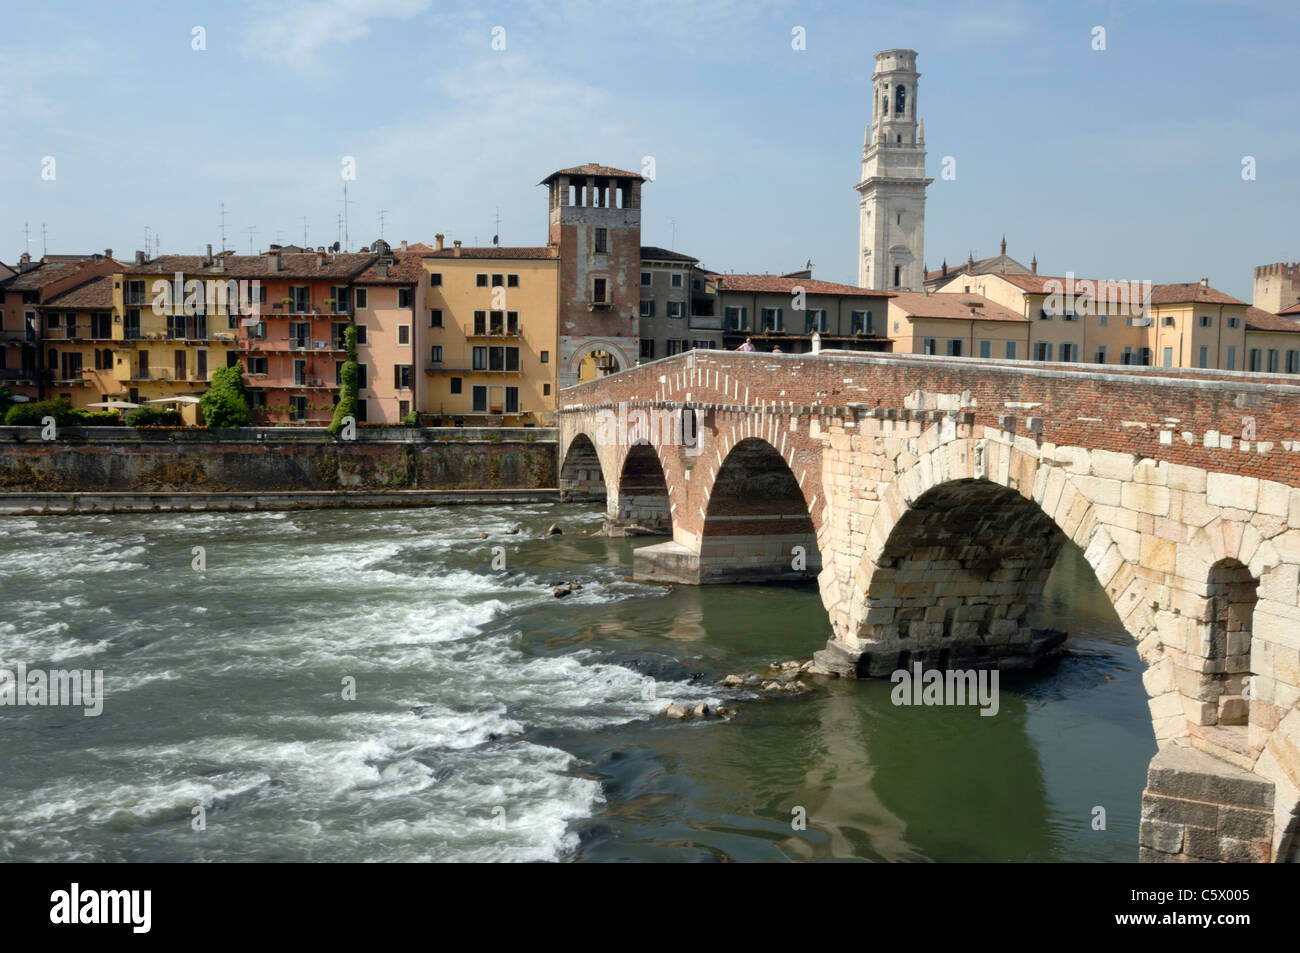 The bell tower of the duomo and Ponte Pietra on the Fiume Adige in Verona Stock Photo